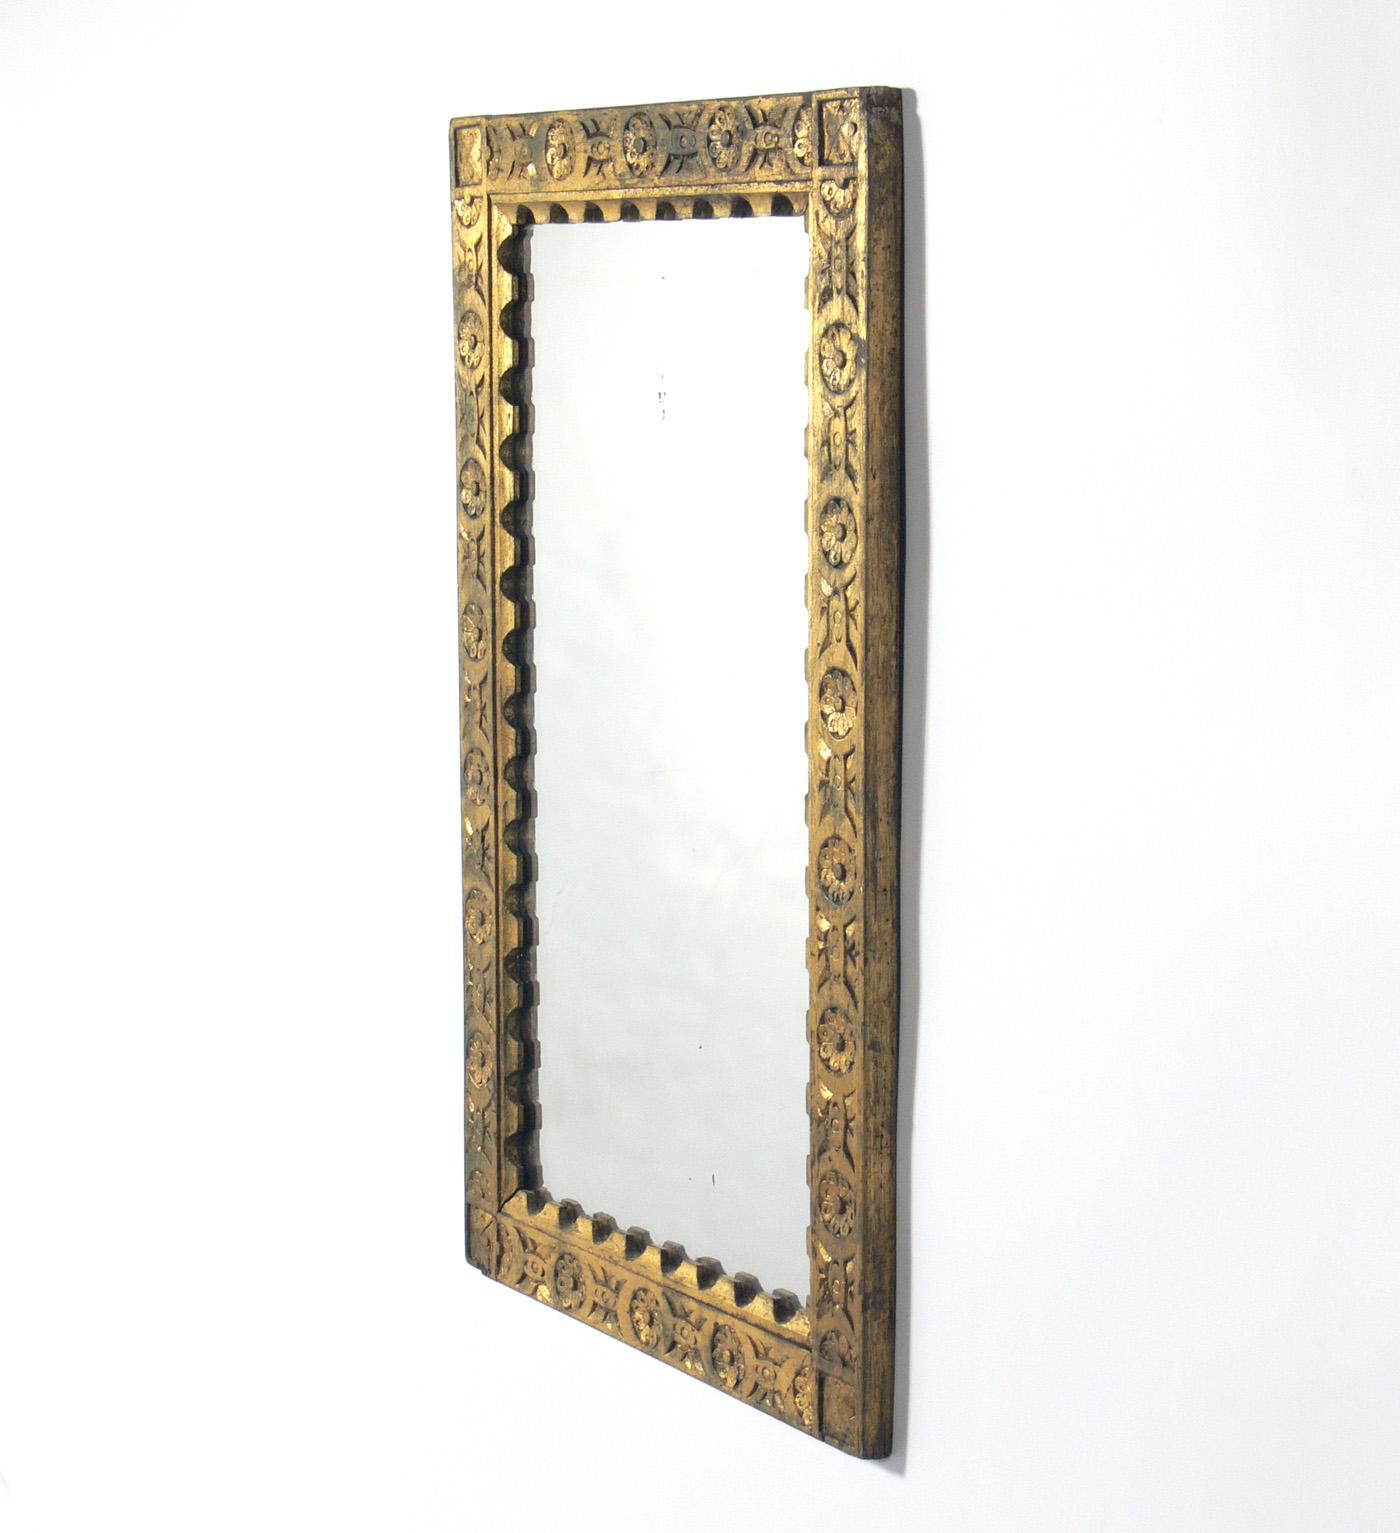 Gilt hand carved Spanish or Italian mirror, at least 1930s, possibly much earlier. Retains wonderful original distressed patina to both the giltwood frame and the mirror.